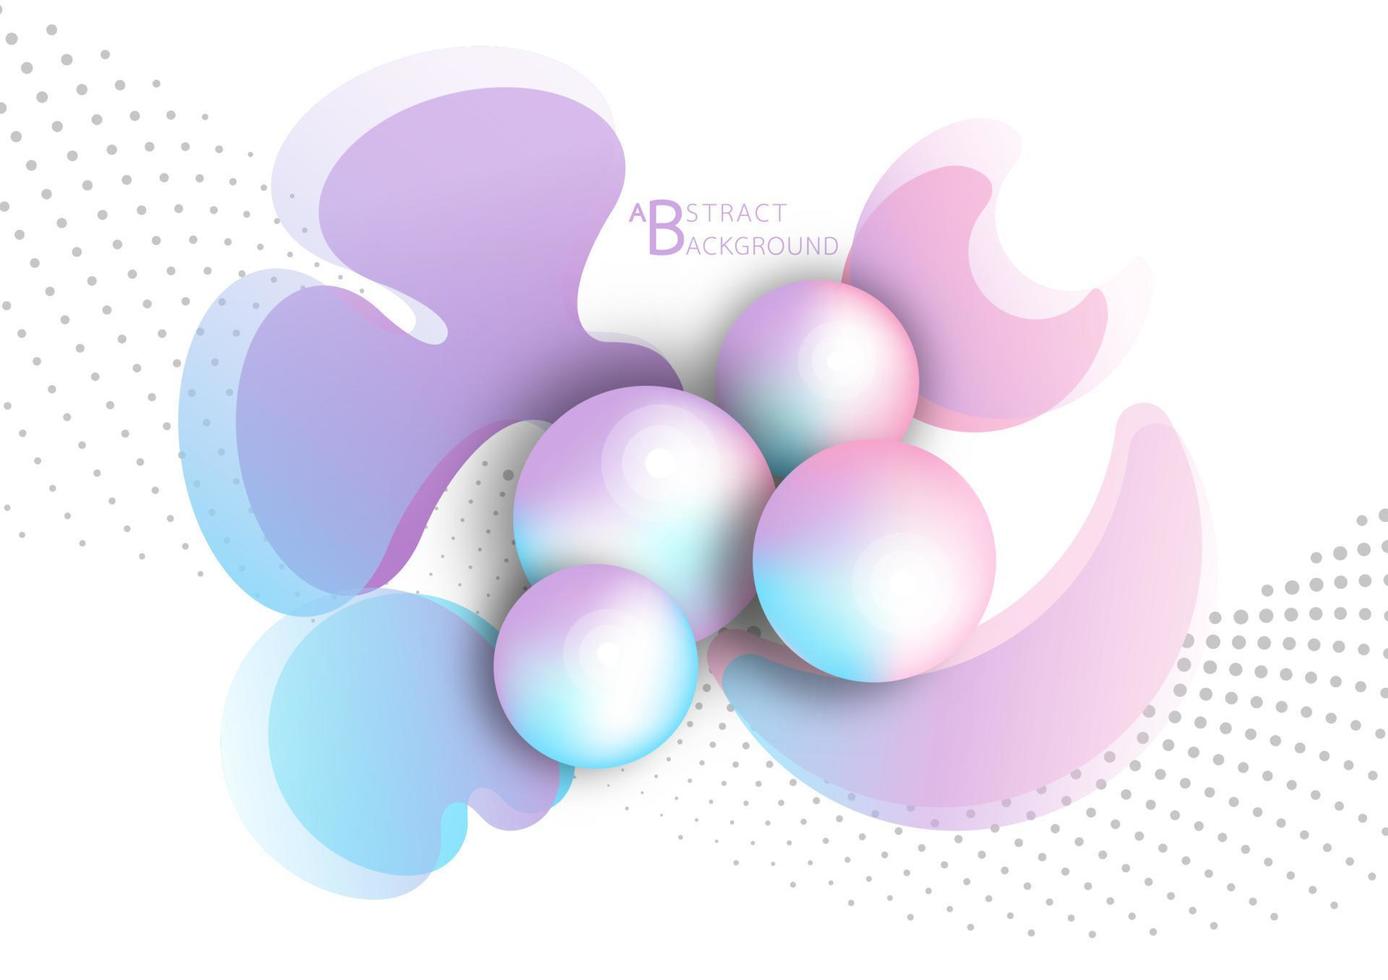 Abstract background with the rainbow ball, flat shape. Vector illustration.